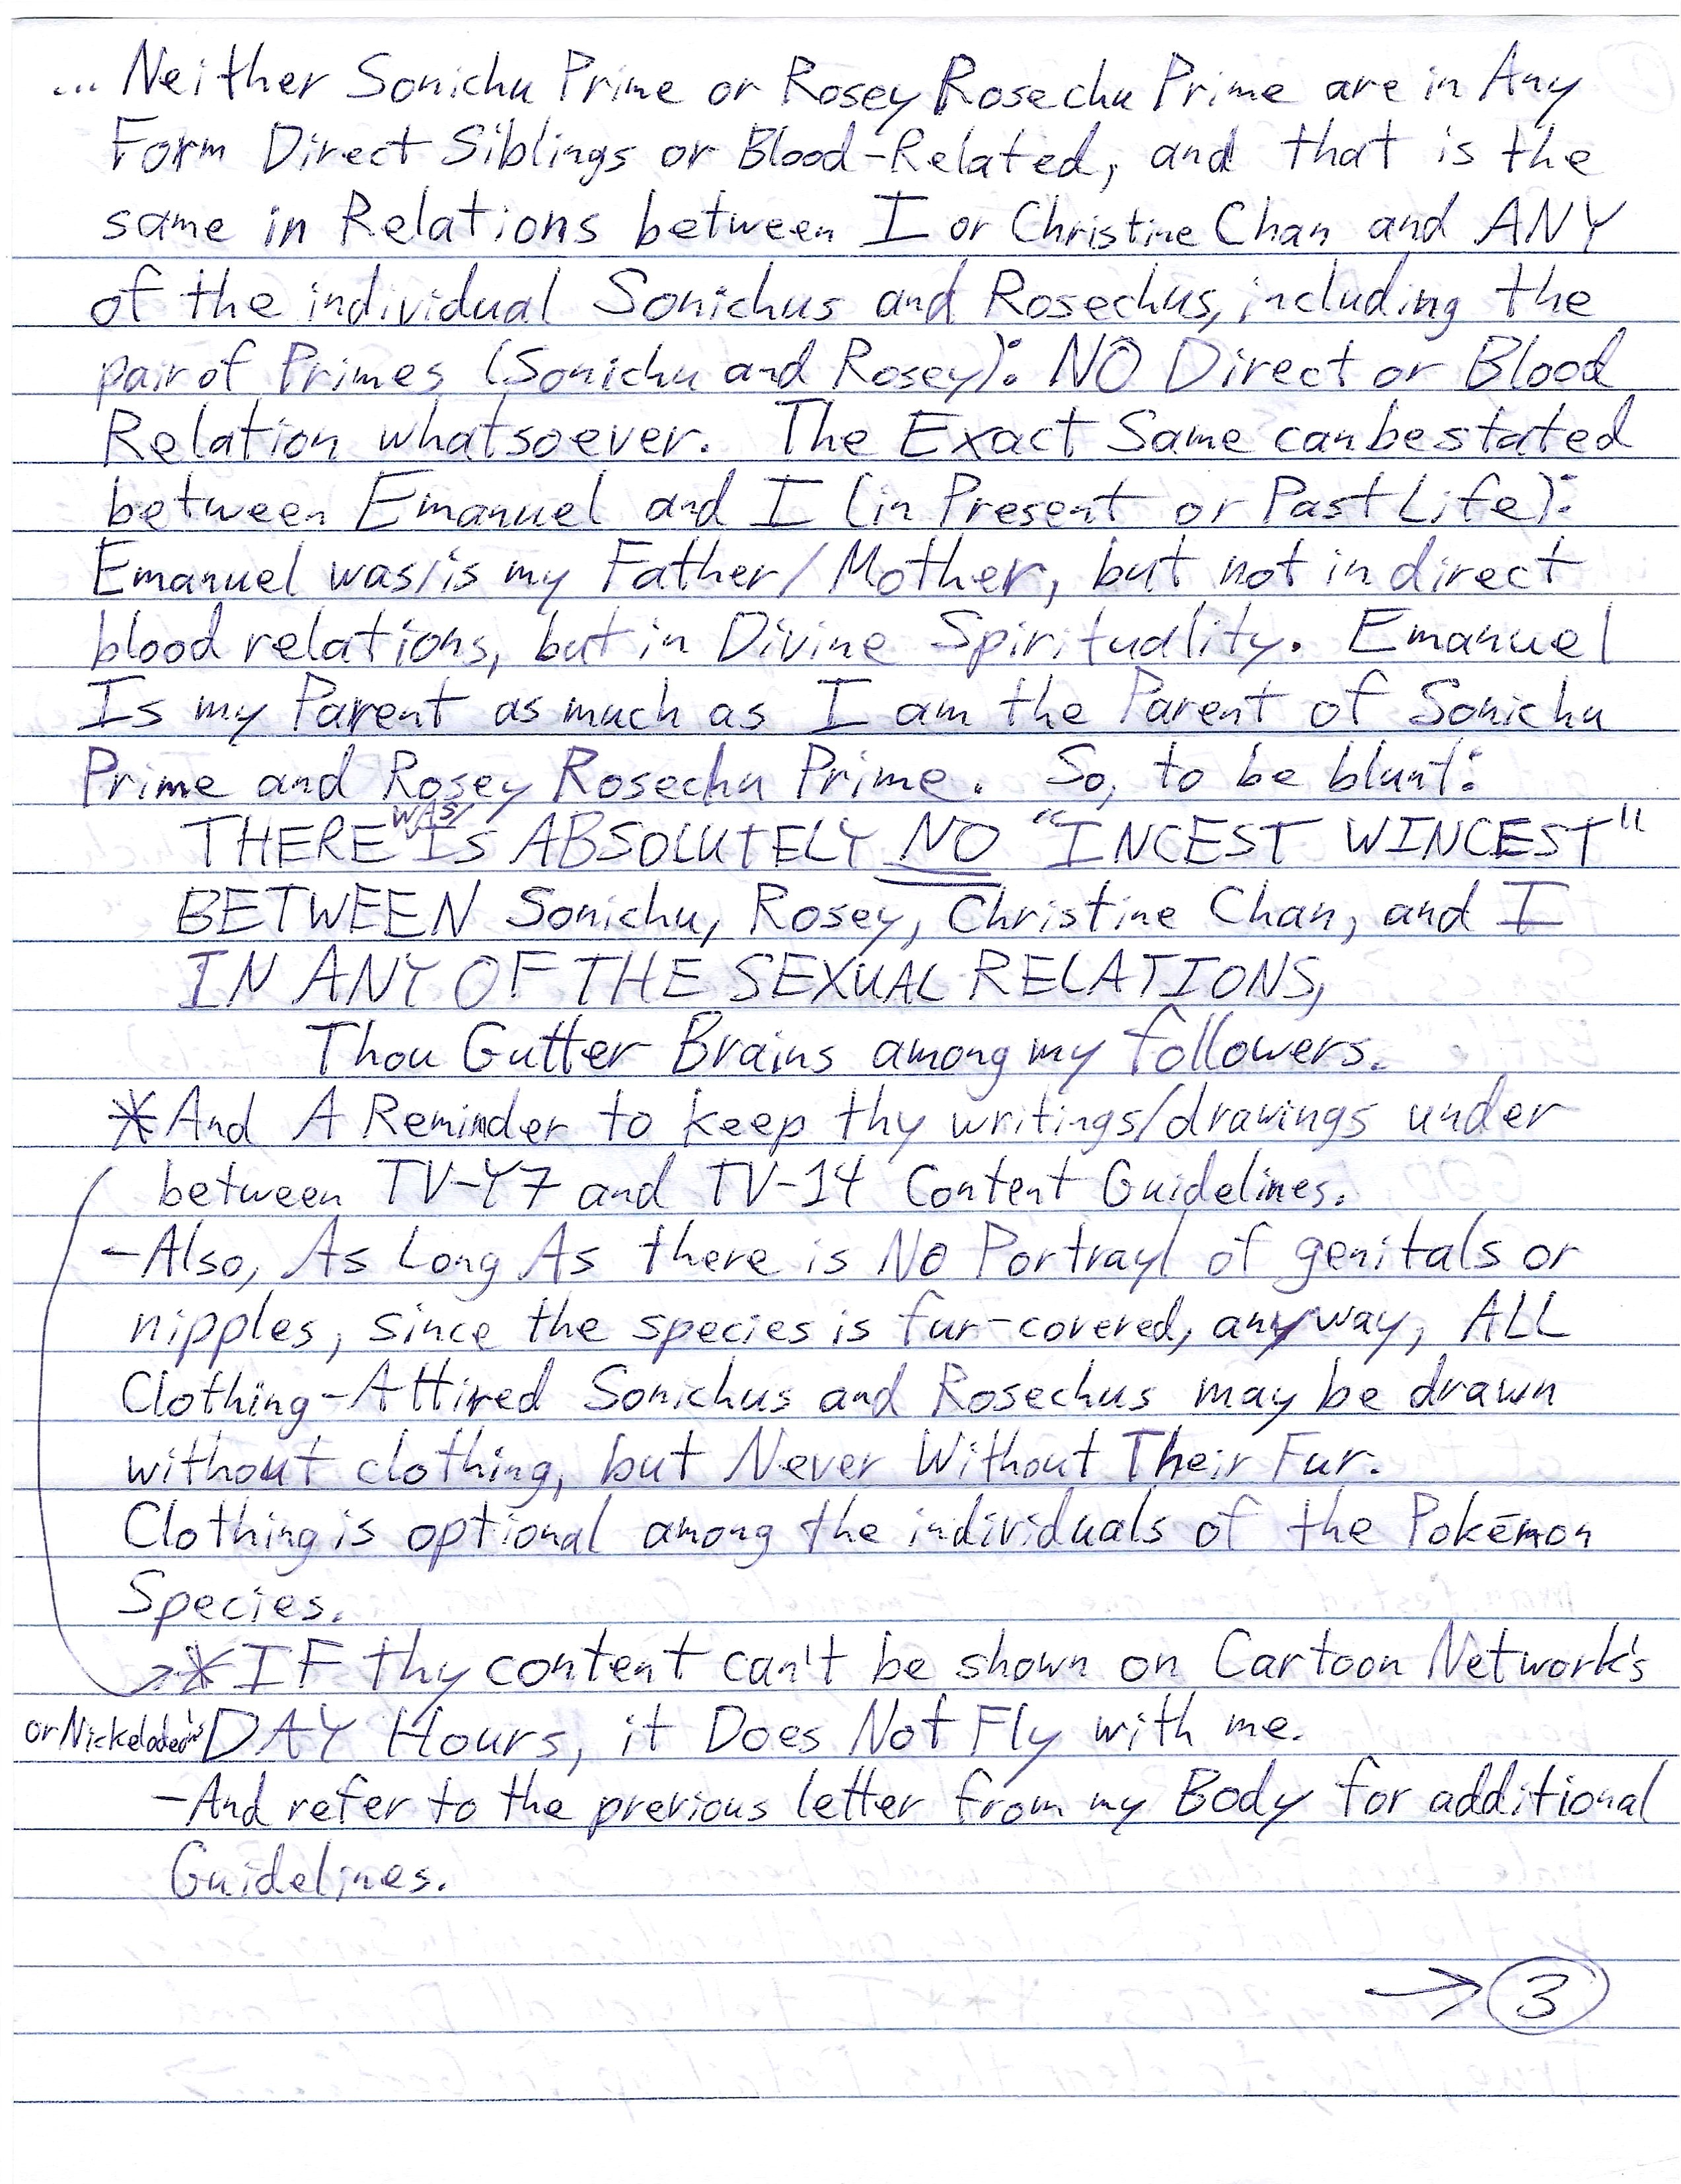 CWC Jan 29 2022 Letter Page 4.jpg